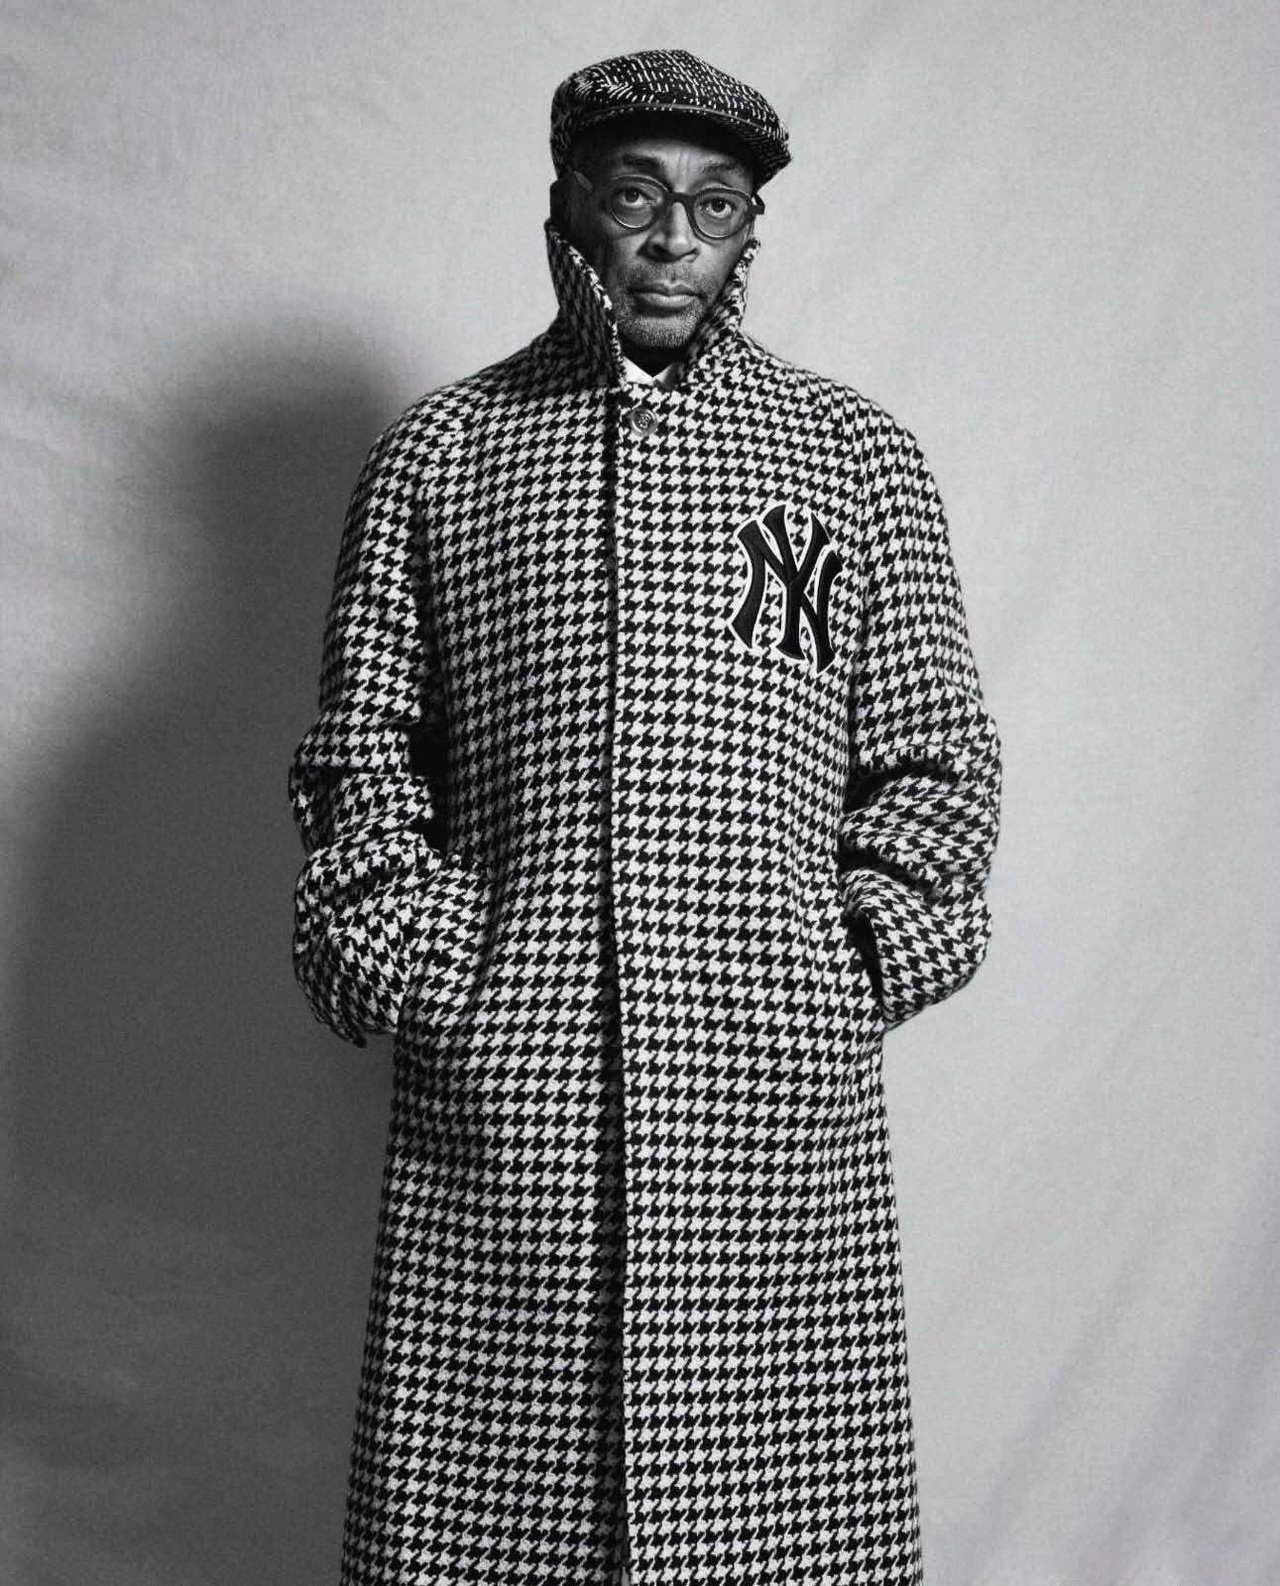 Happy Birthday Spike Lee, you one-of-a-kind human. 